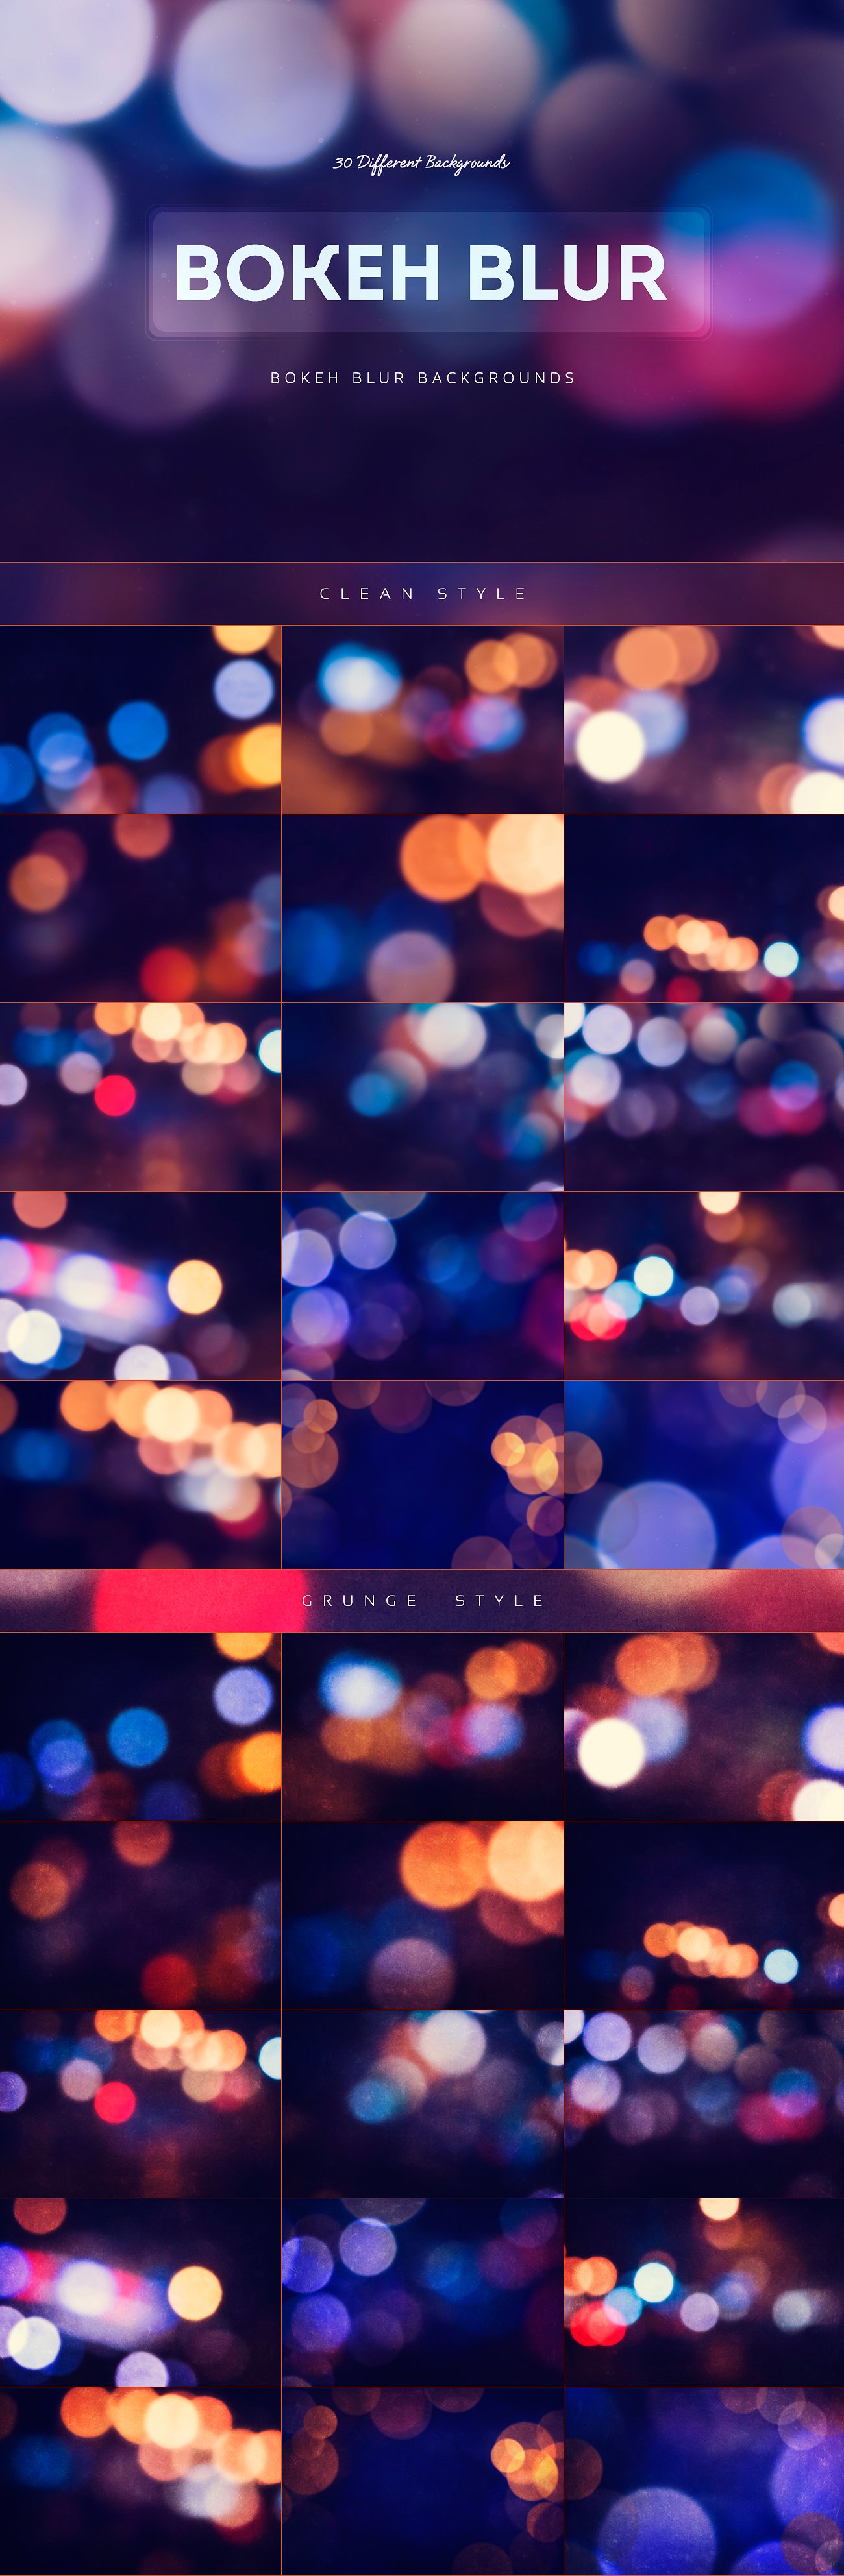 FREE 23+ High-Resolution Blurred Background Designs in PSD | AI